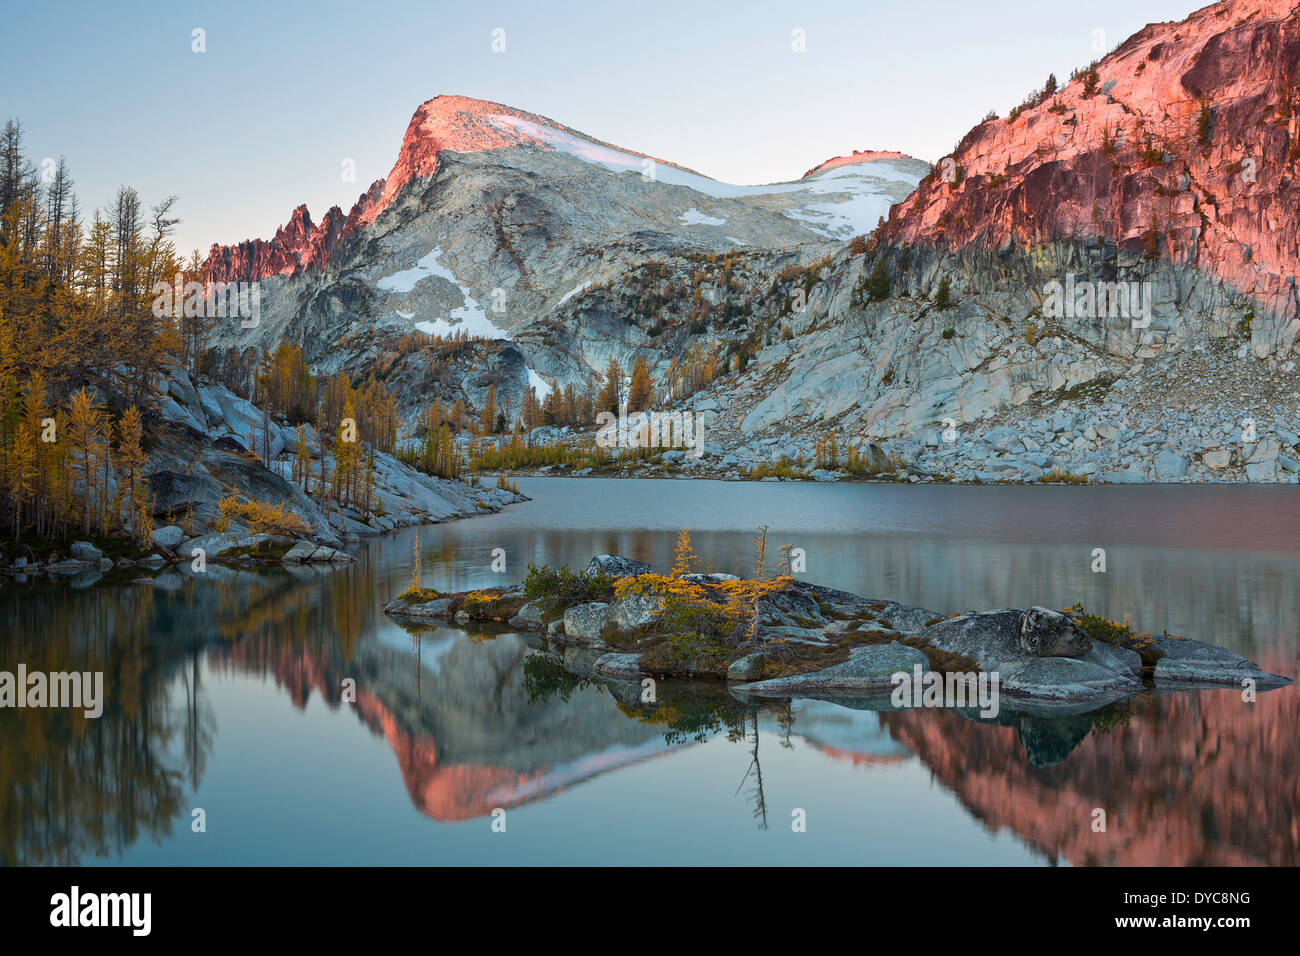 Little Annapurna mountain reflects in Perfection Lake in the Alpine Lakes Wilderness Enchantments section at sunrise Washington Stock Photo